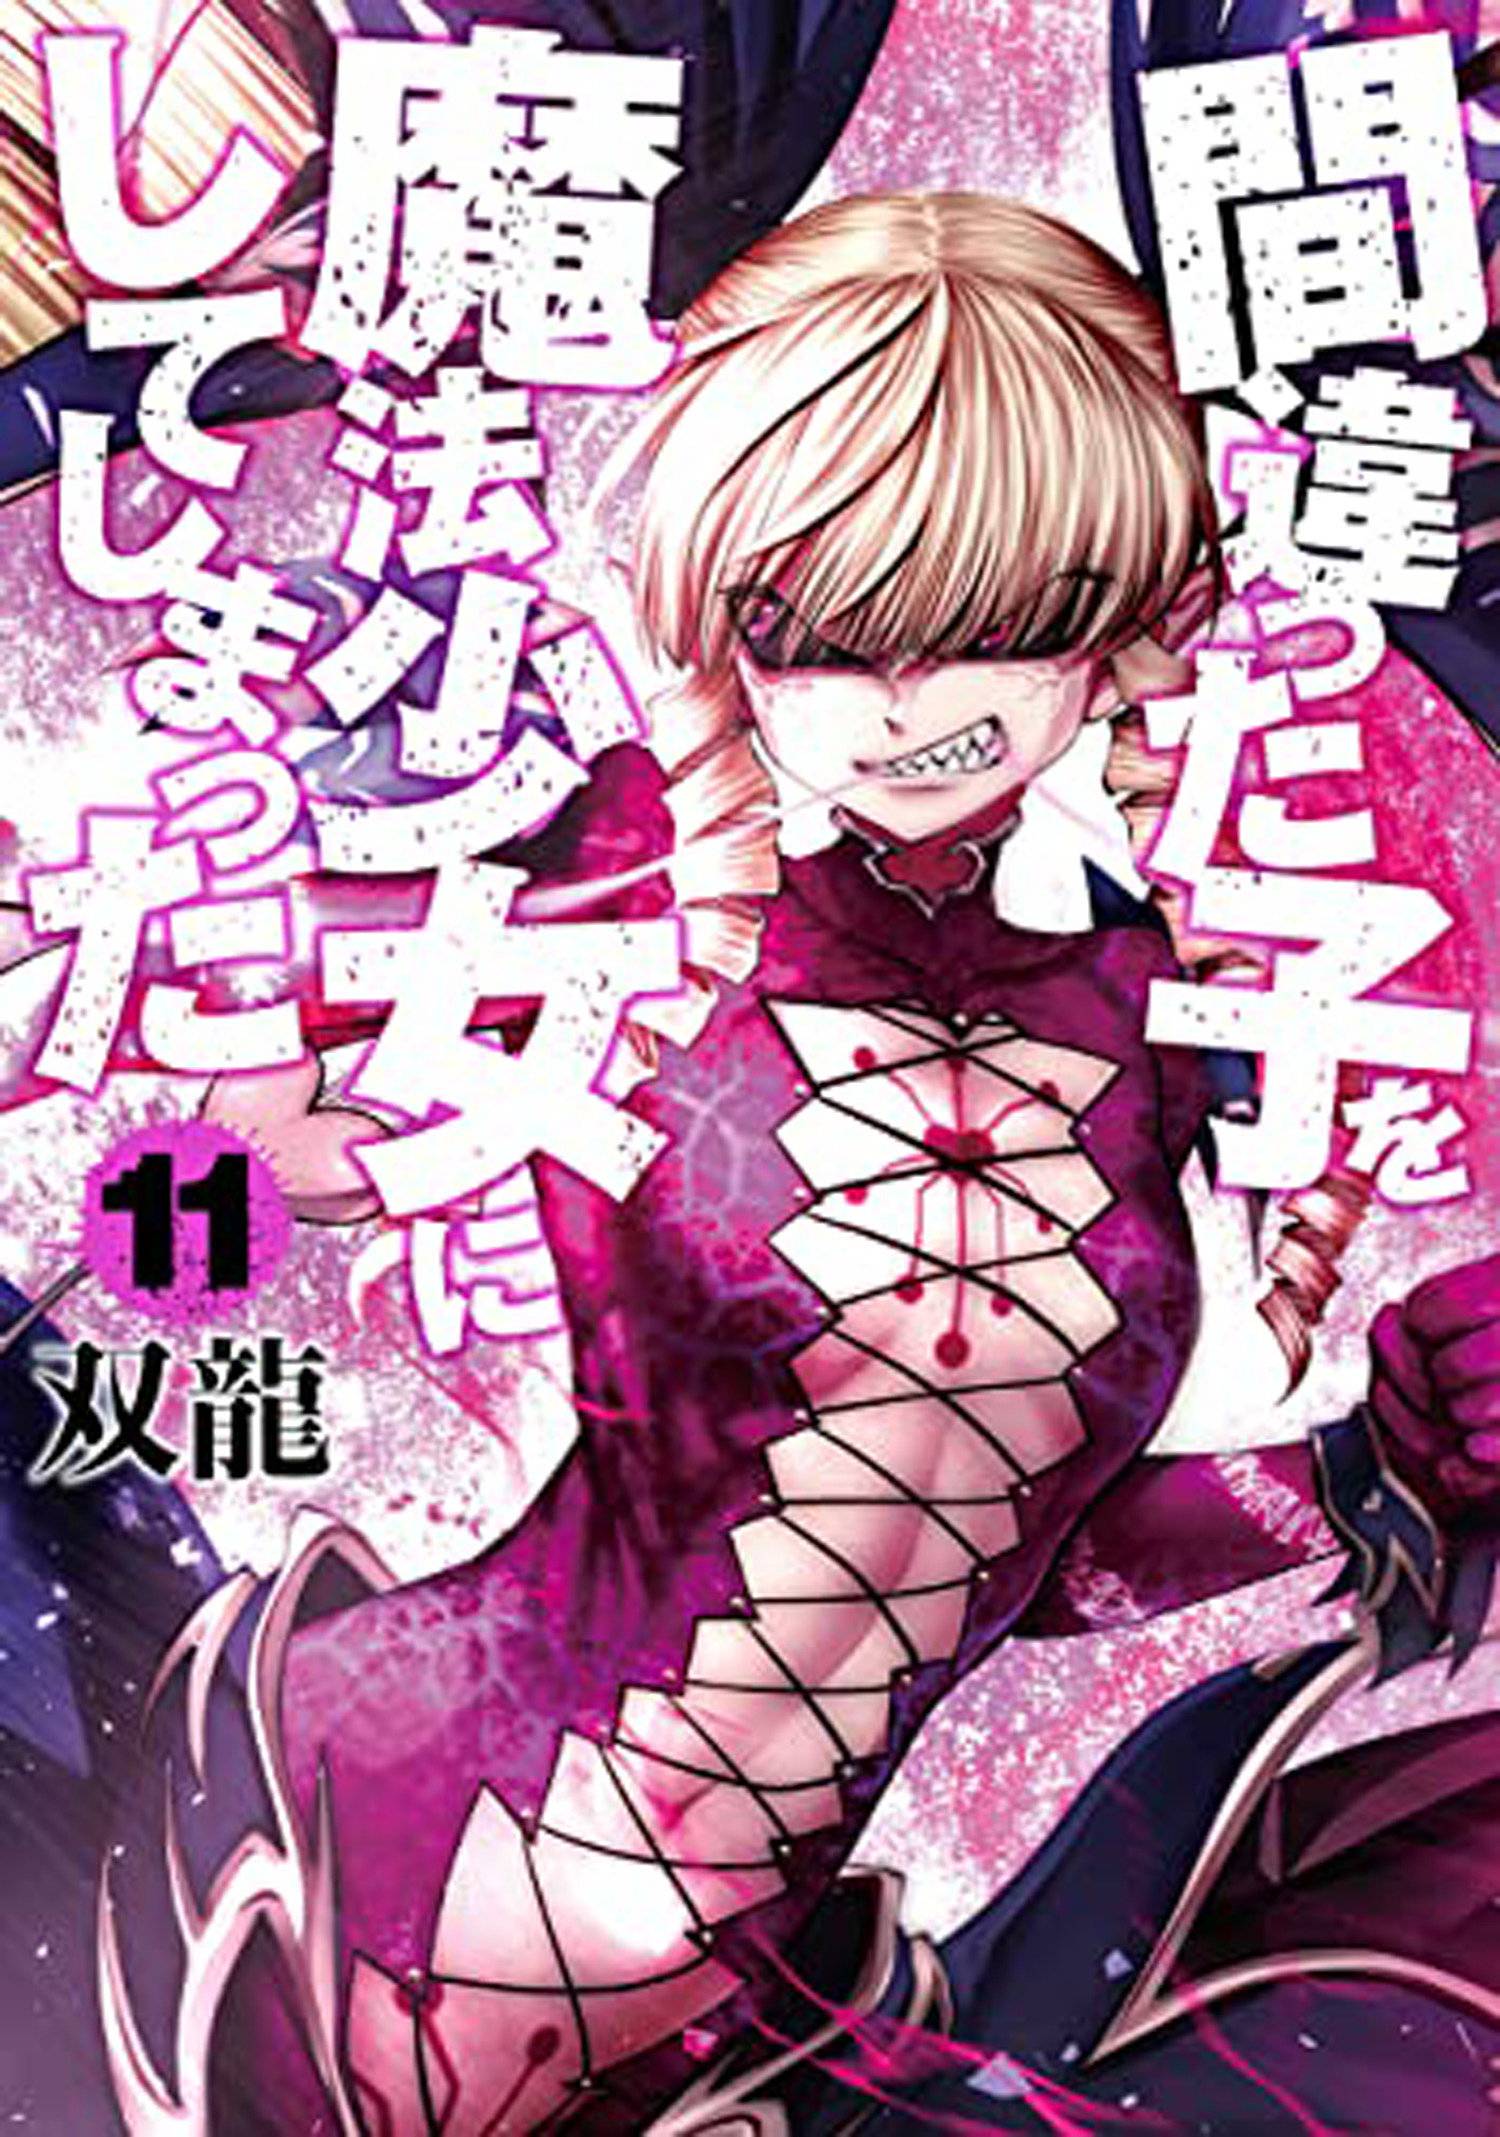 MACHIMAHO MADE WRONG PERSON MAGICAL GIRL GN VOL 11 (MR)